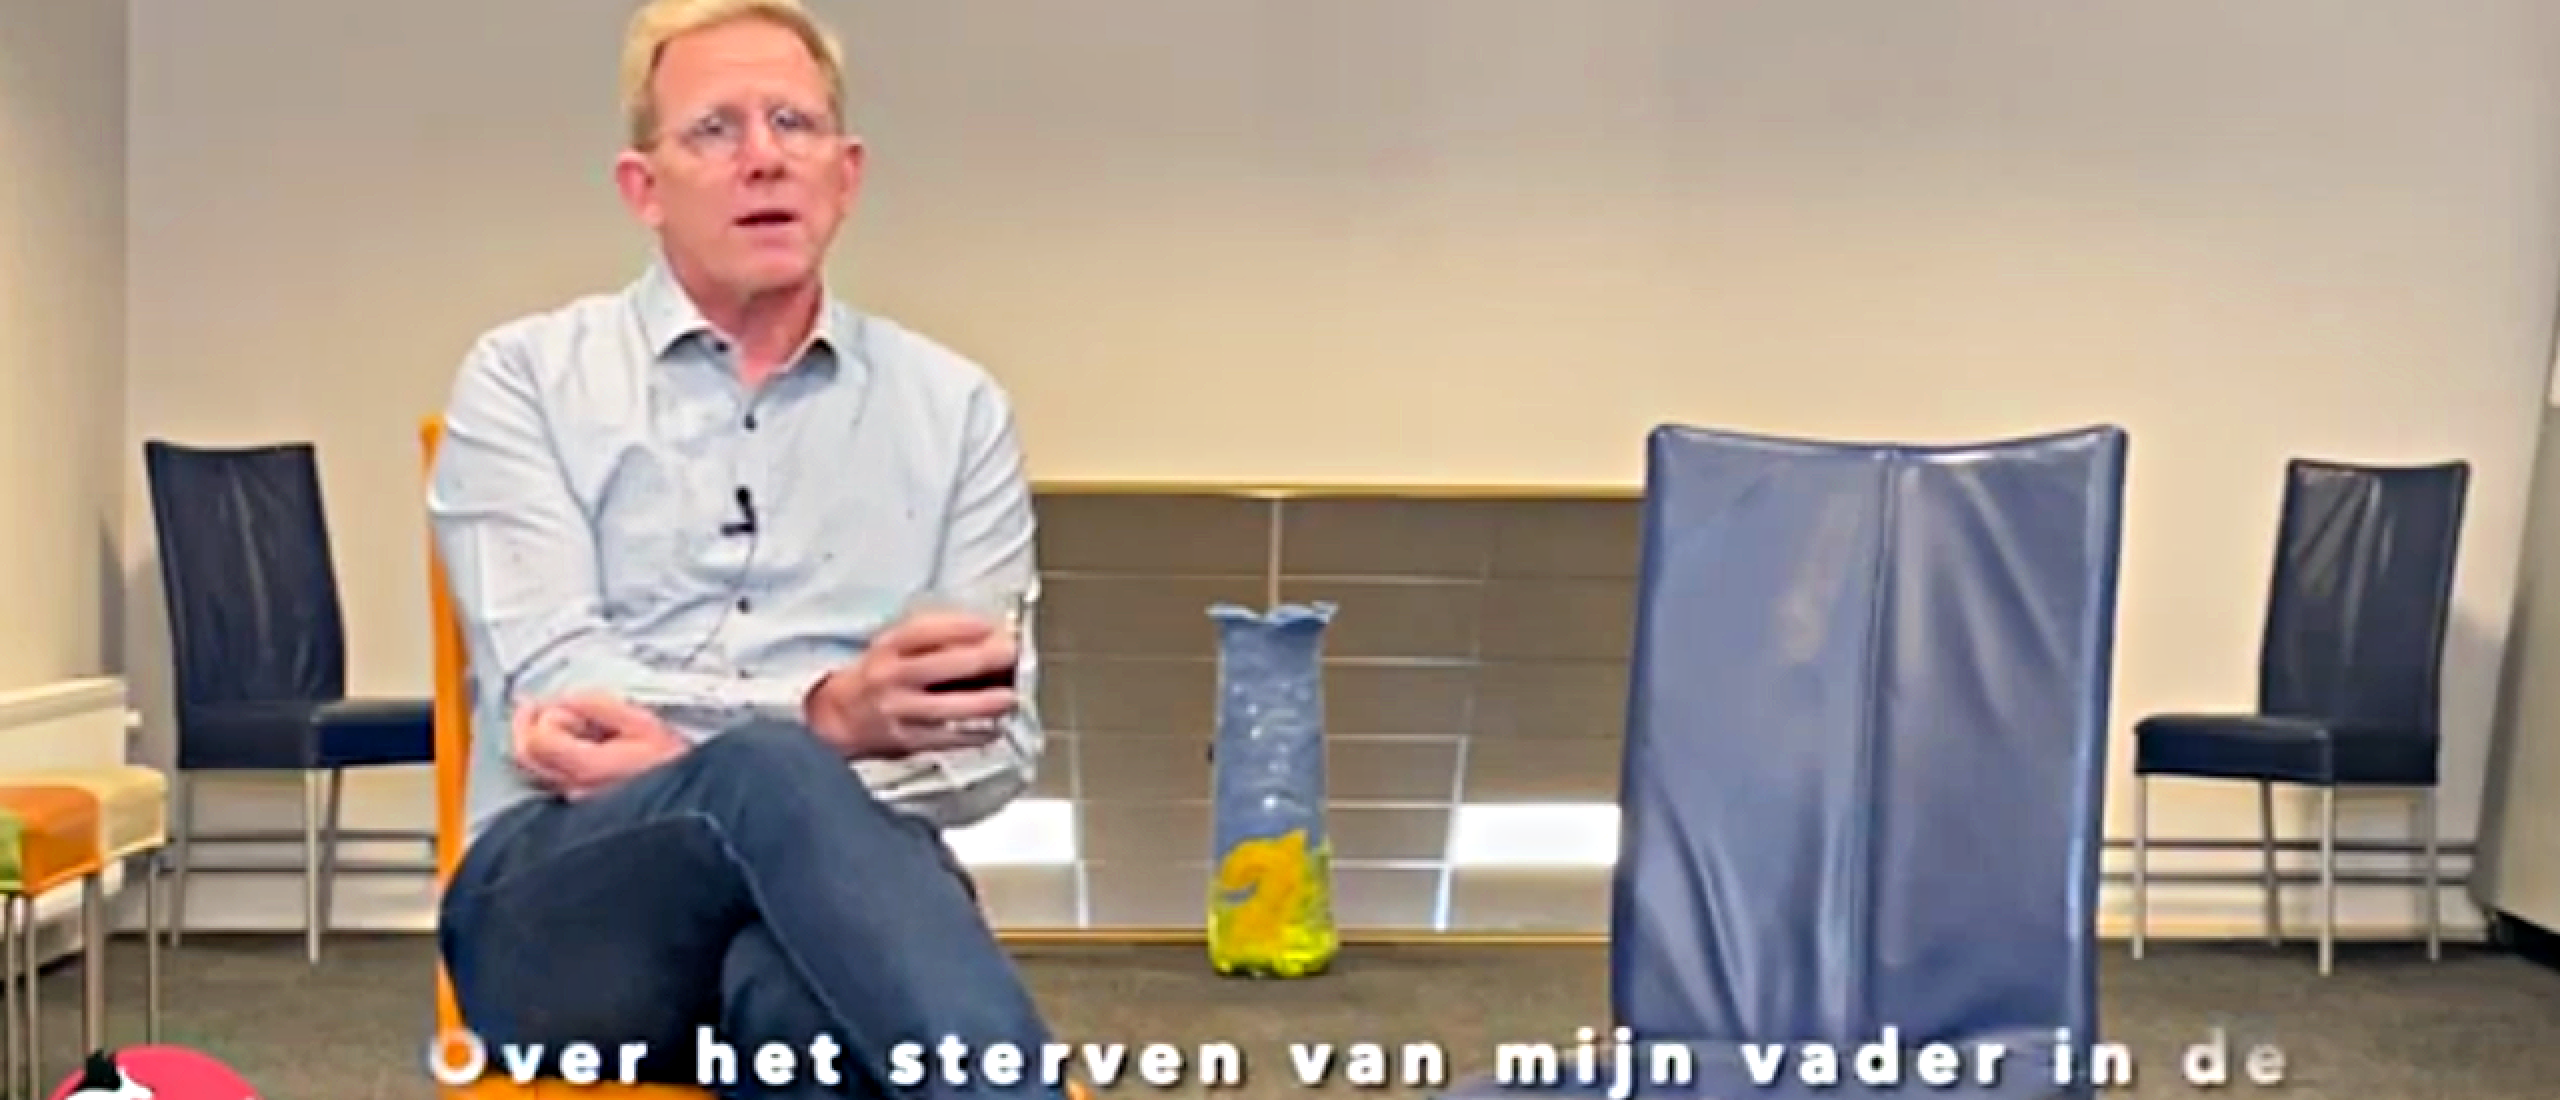 Over papa's sterven in de familieopstelling